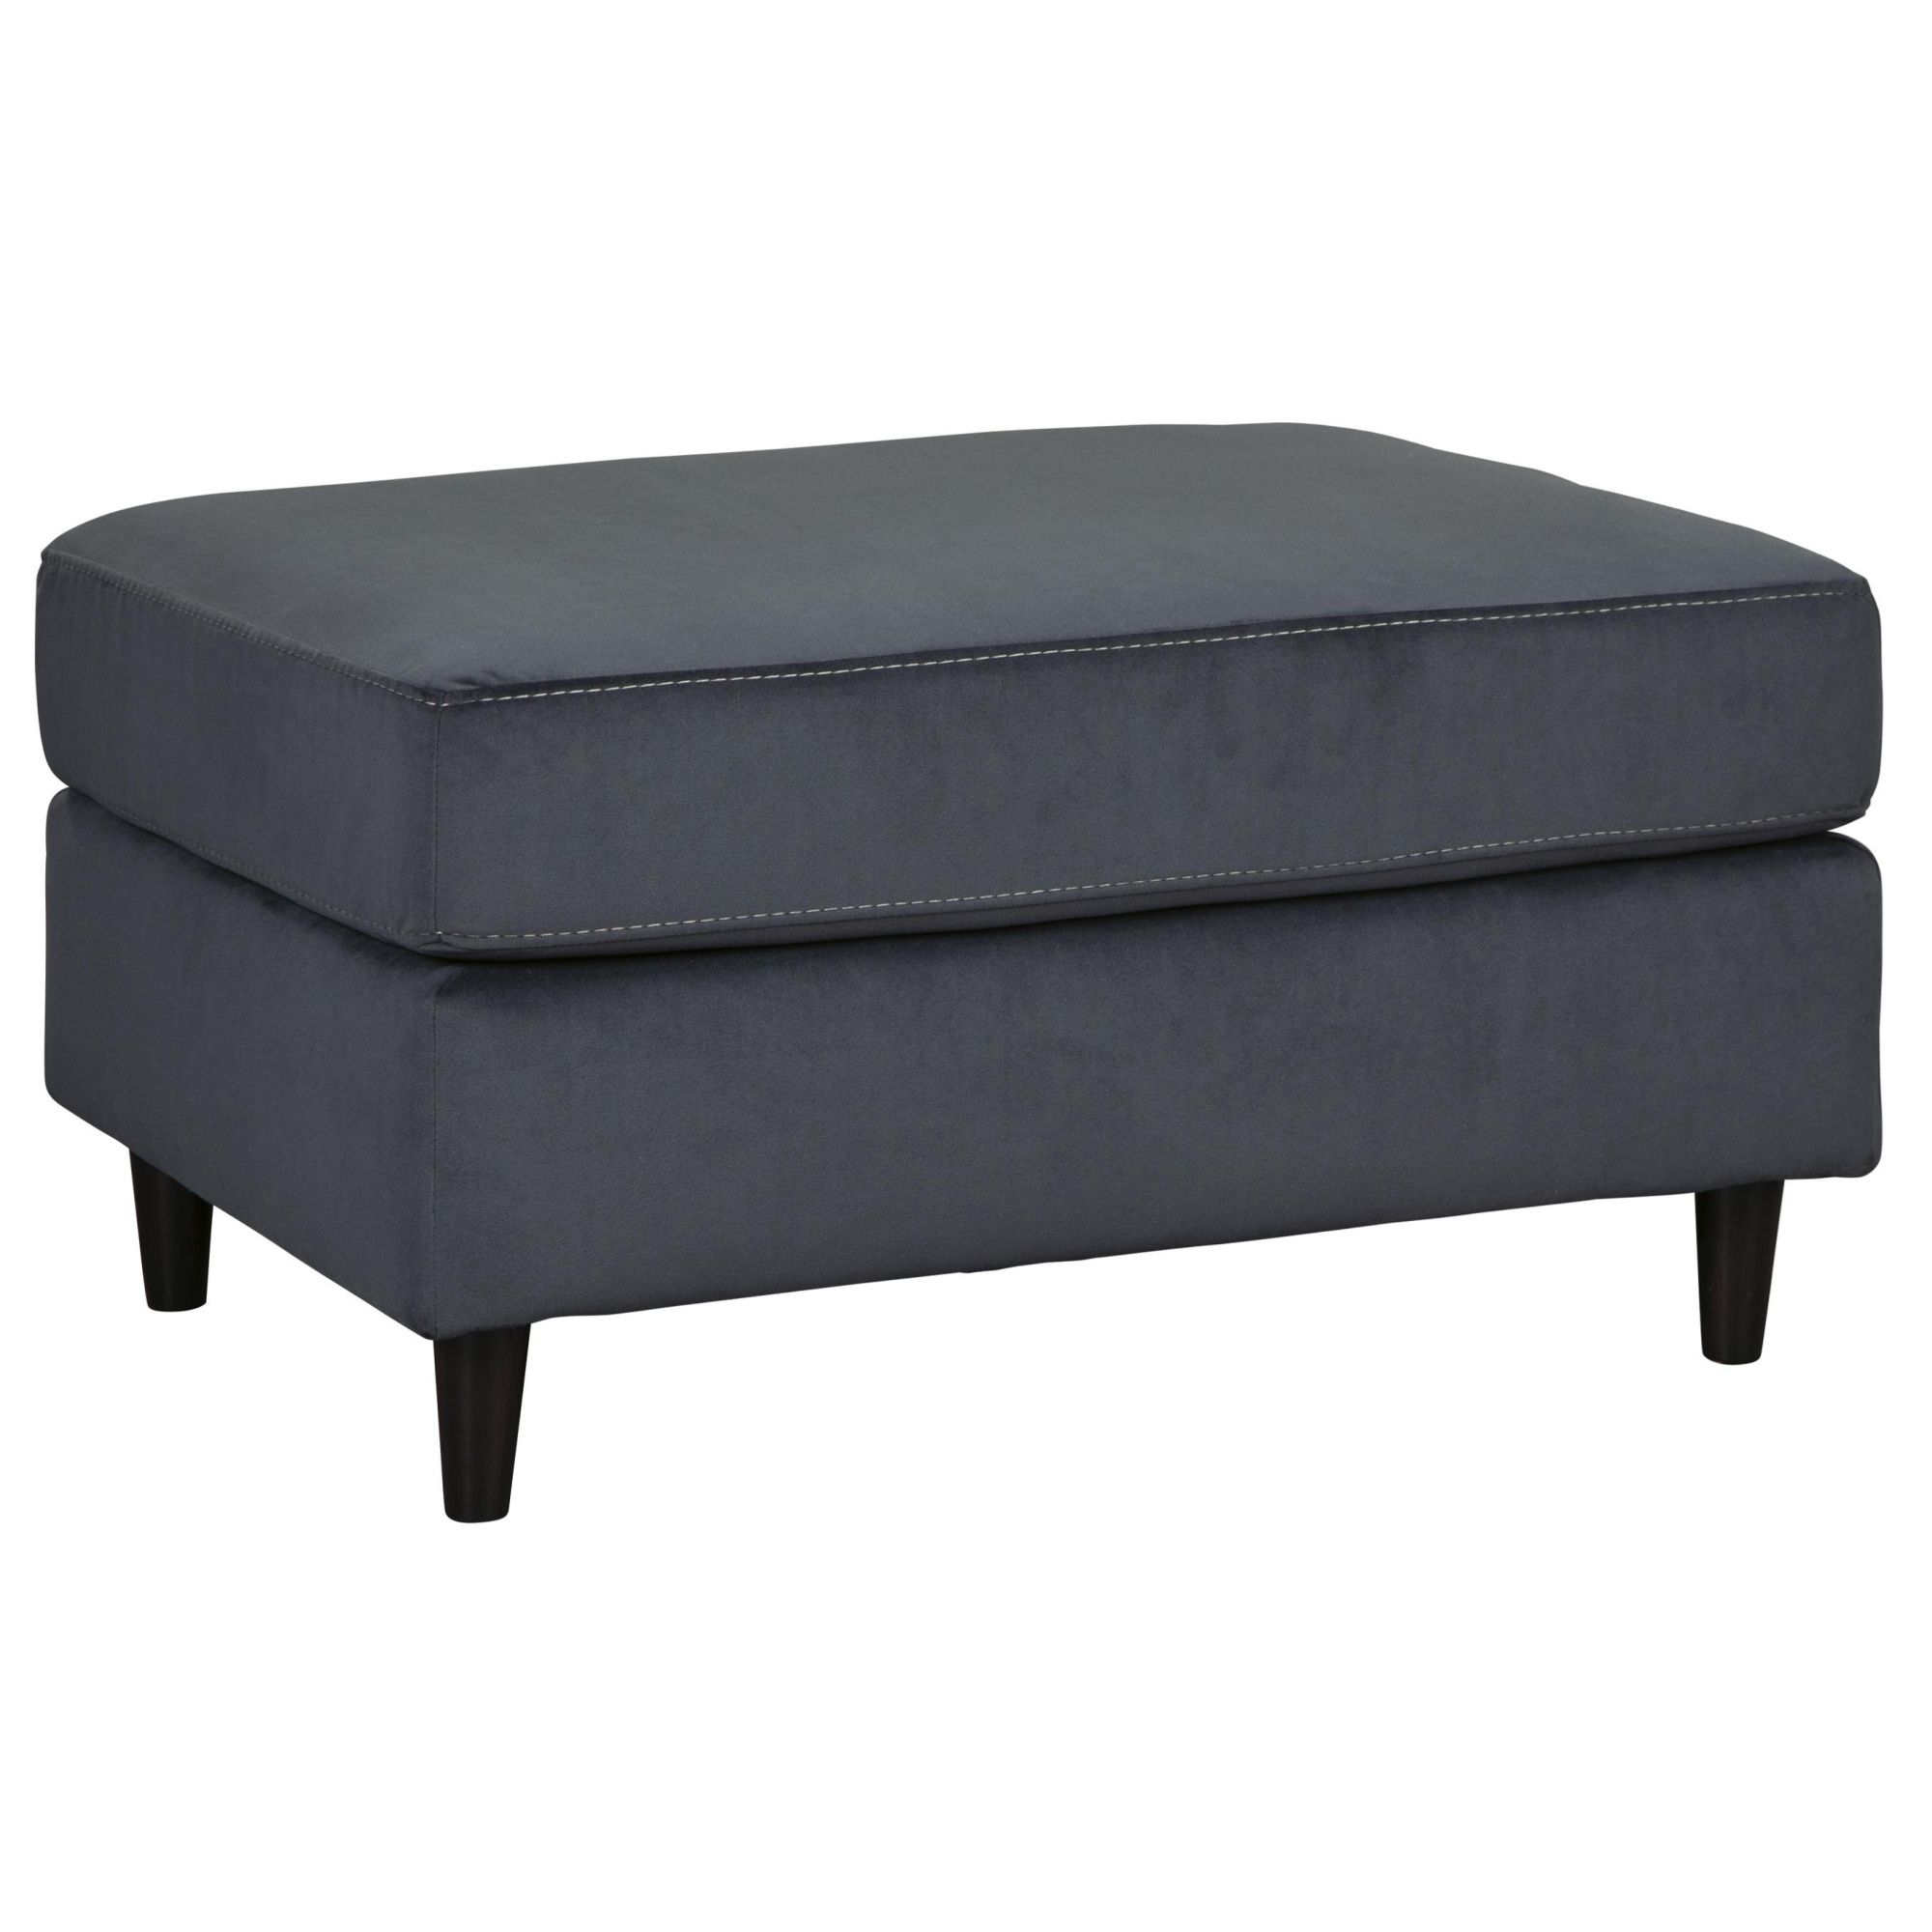 Fabric Upholstered Wooden Ottoman With Tapered Legs, Gray – Walmart Throughout Wooden Legs Ottomans (View 13 of 20)